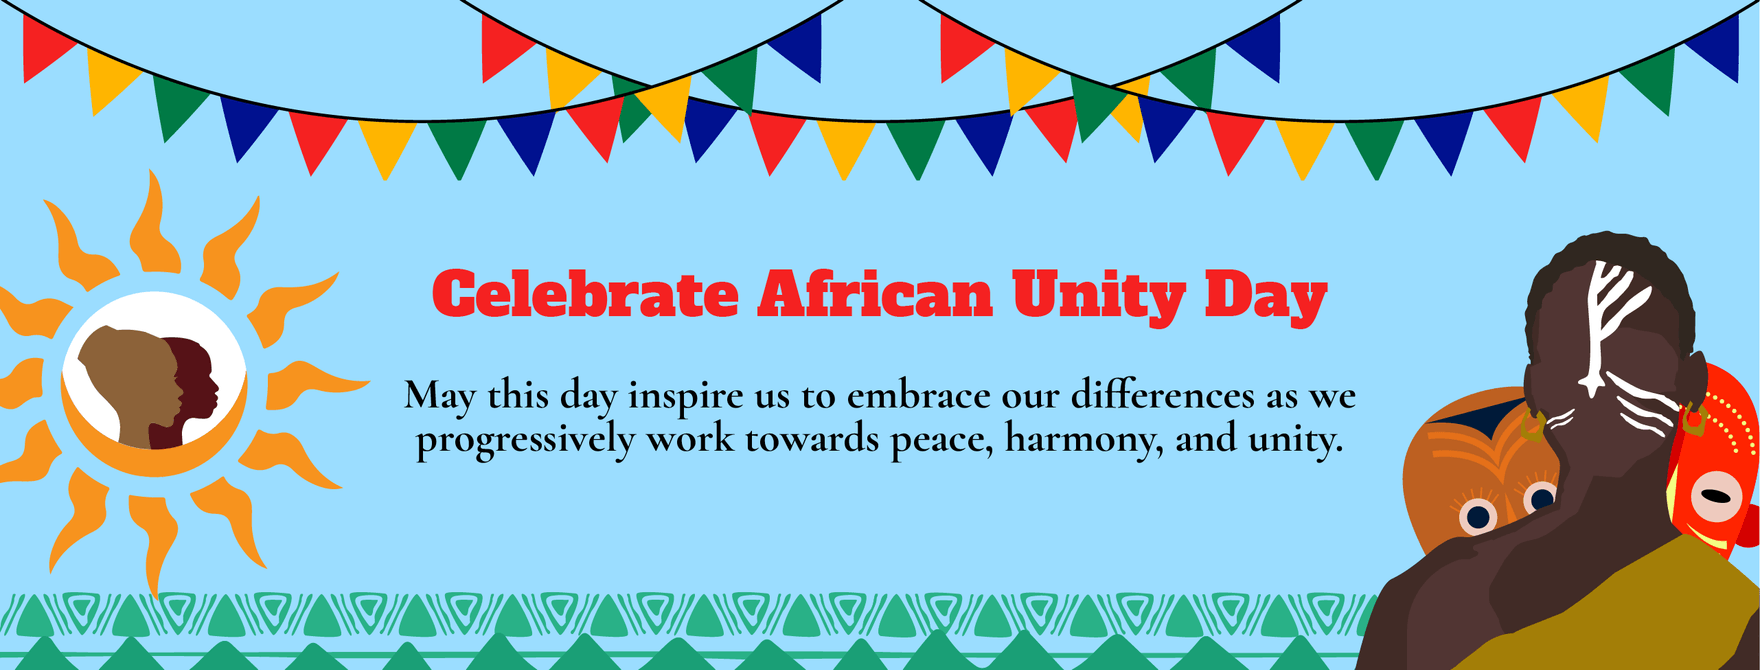 African Unity Day Facebook Cover Banner